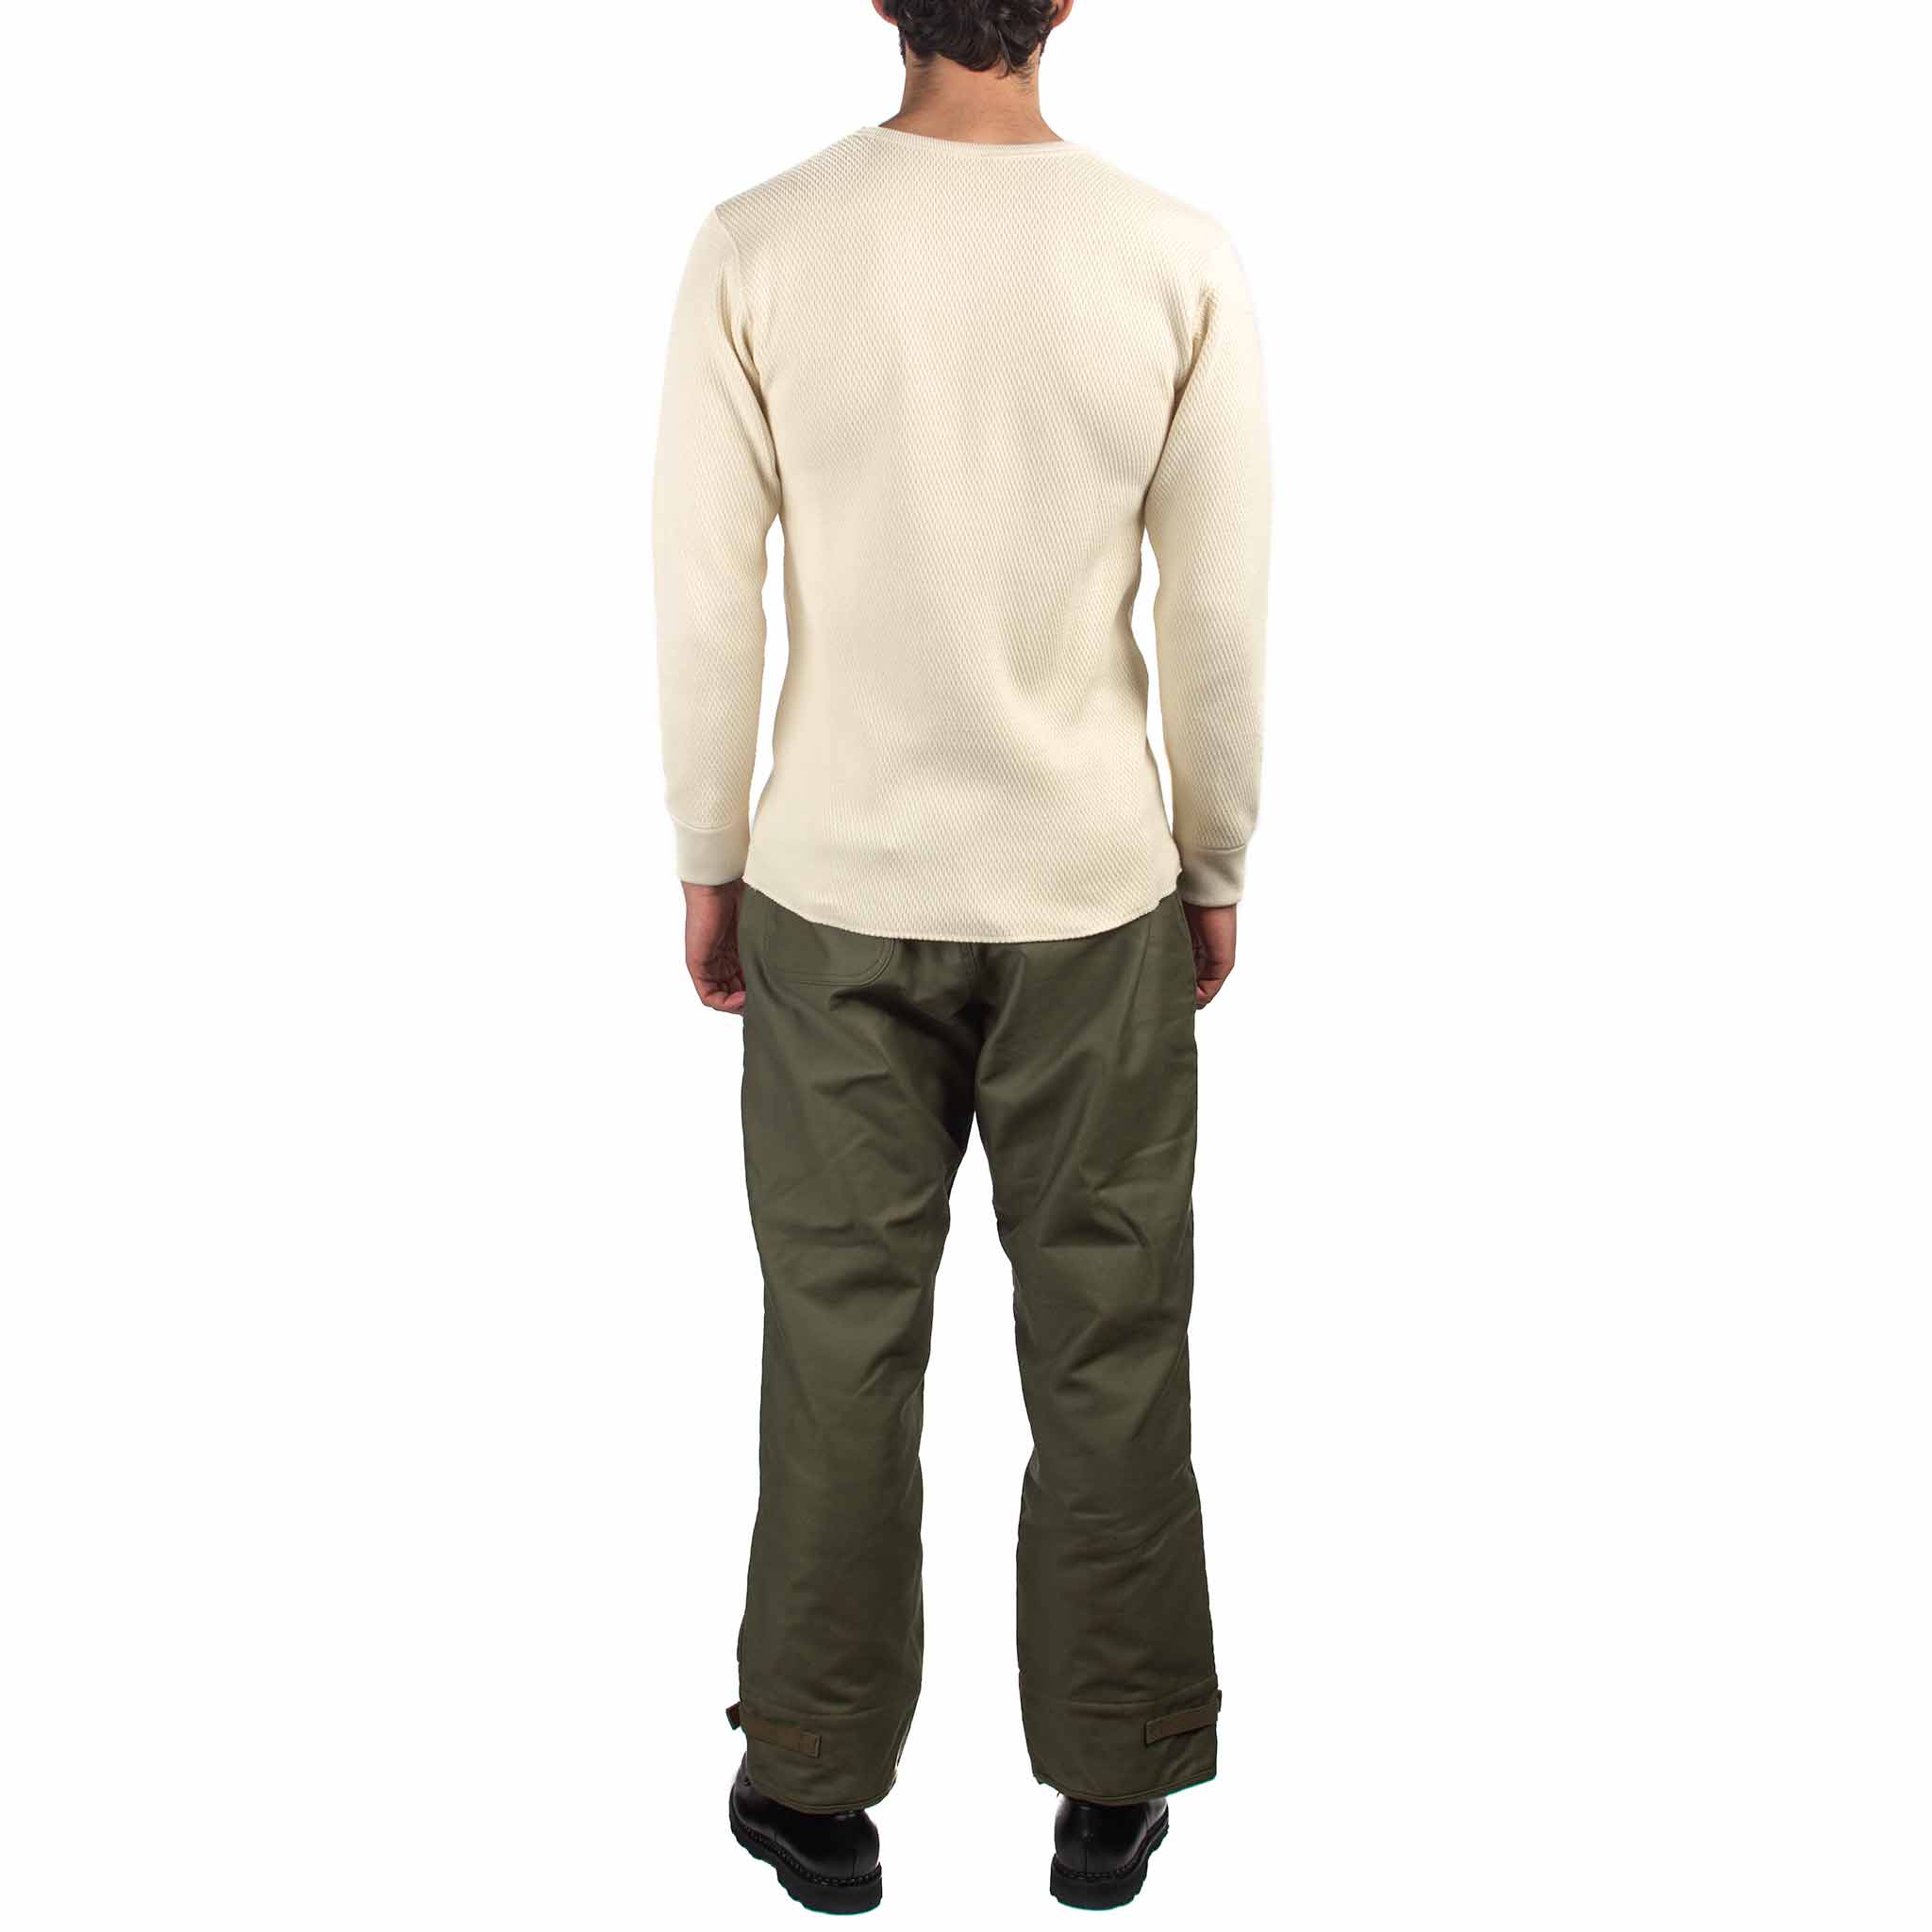 The Real McCoy's MC12110 Military Thermal Shirt Ivory Back